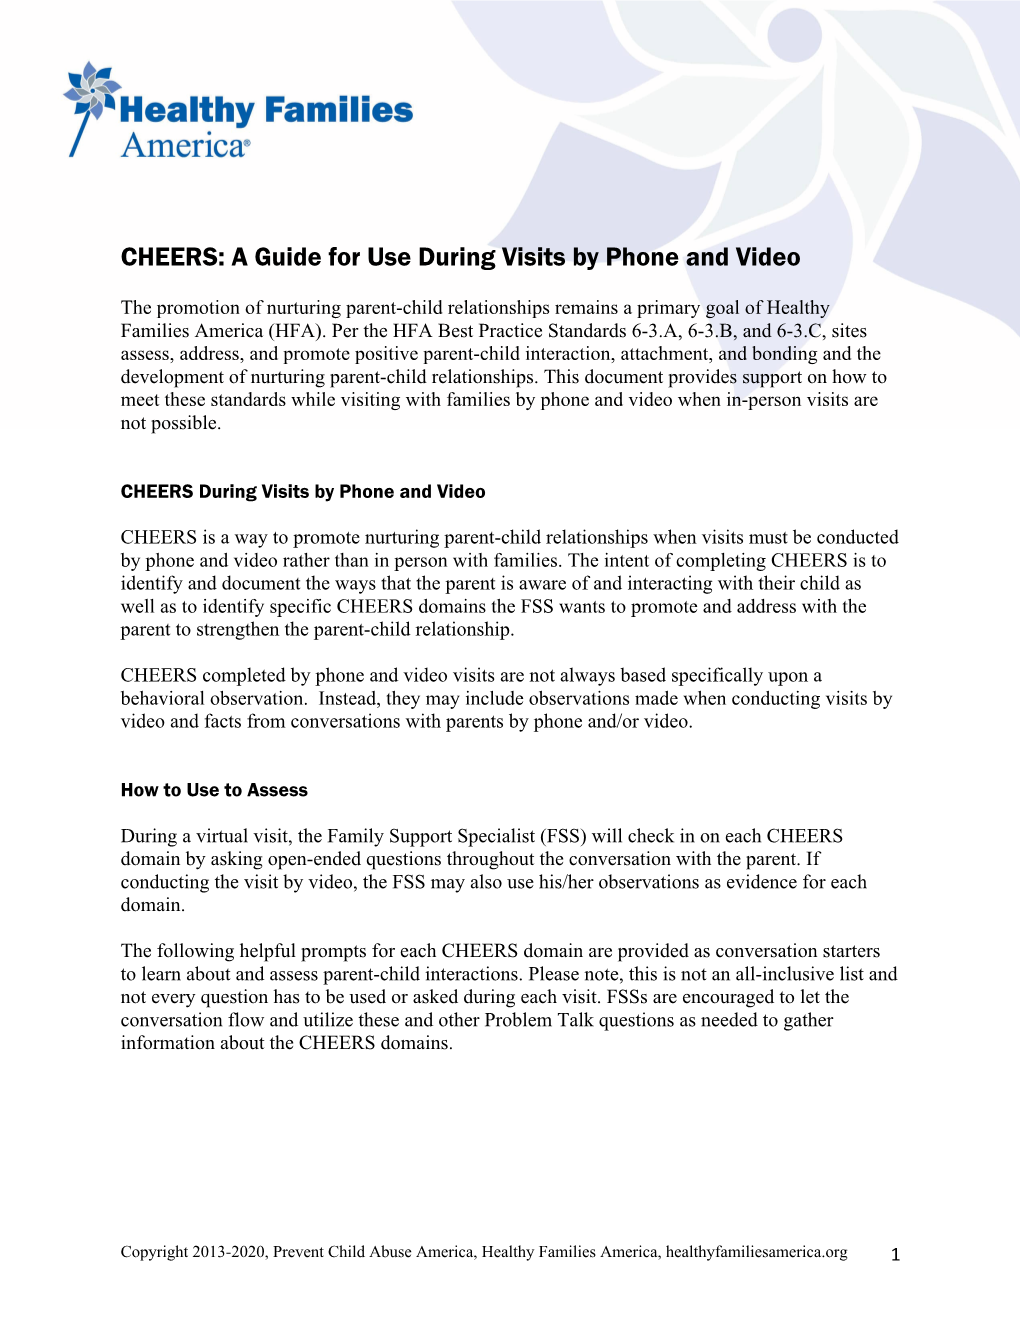 CHEERS Phone Video Guide 032520